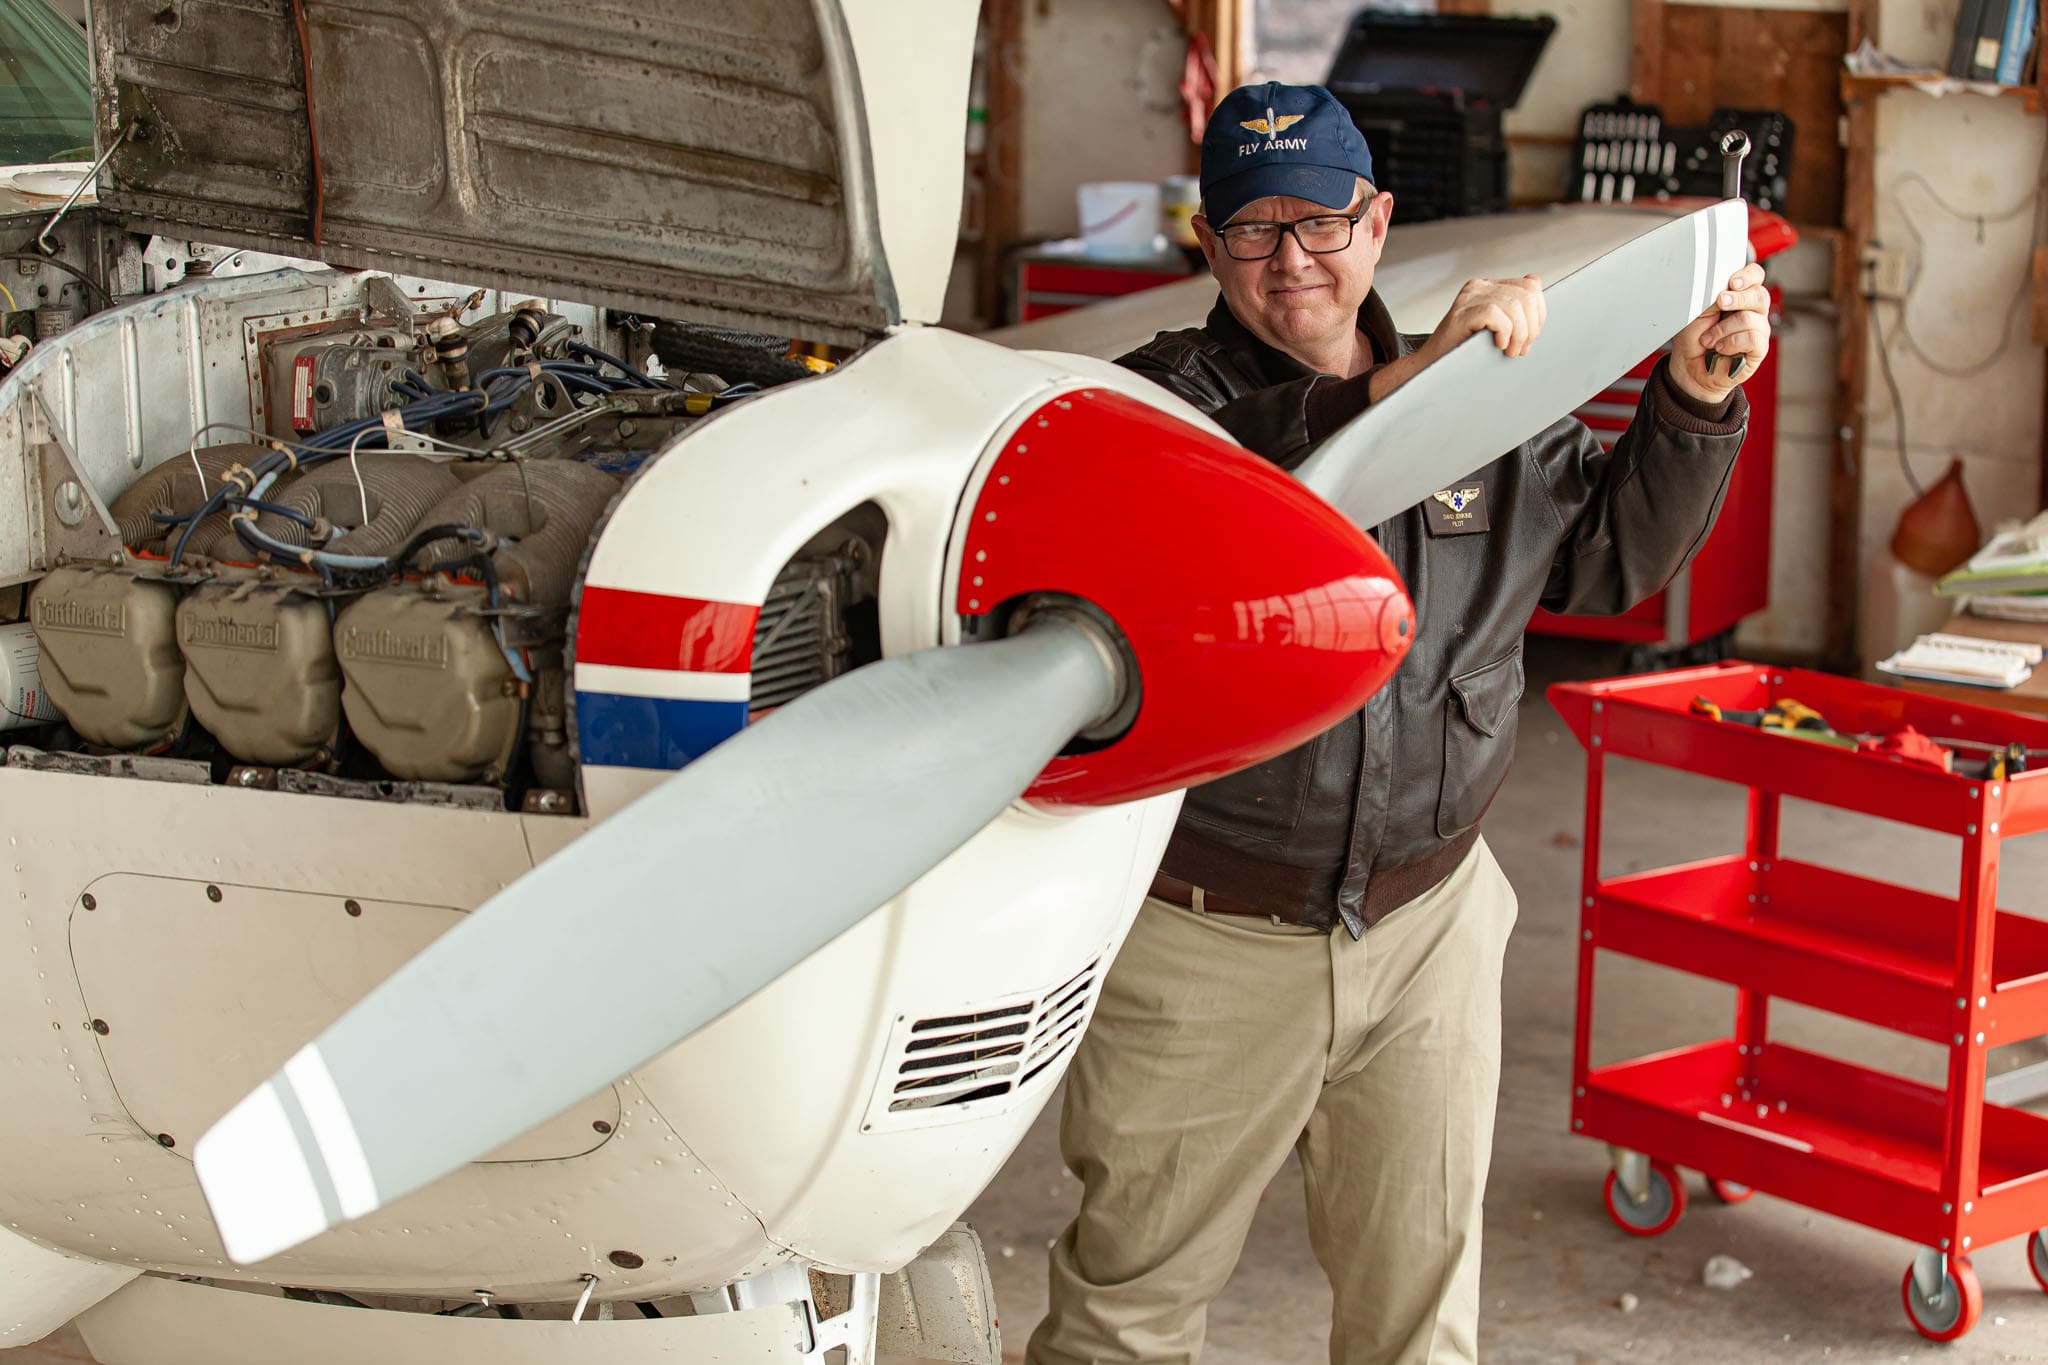 Georgia-State-Representative-and-helicopter-pilot-David-Jenkins-inspecting-his-airplane-engine-and-propeller.